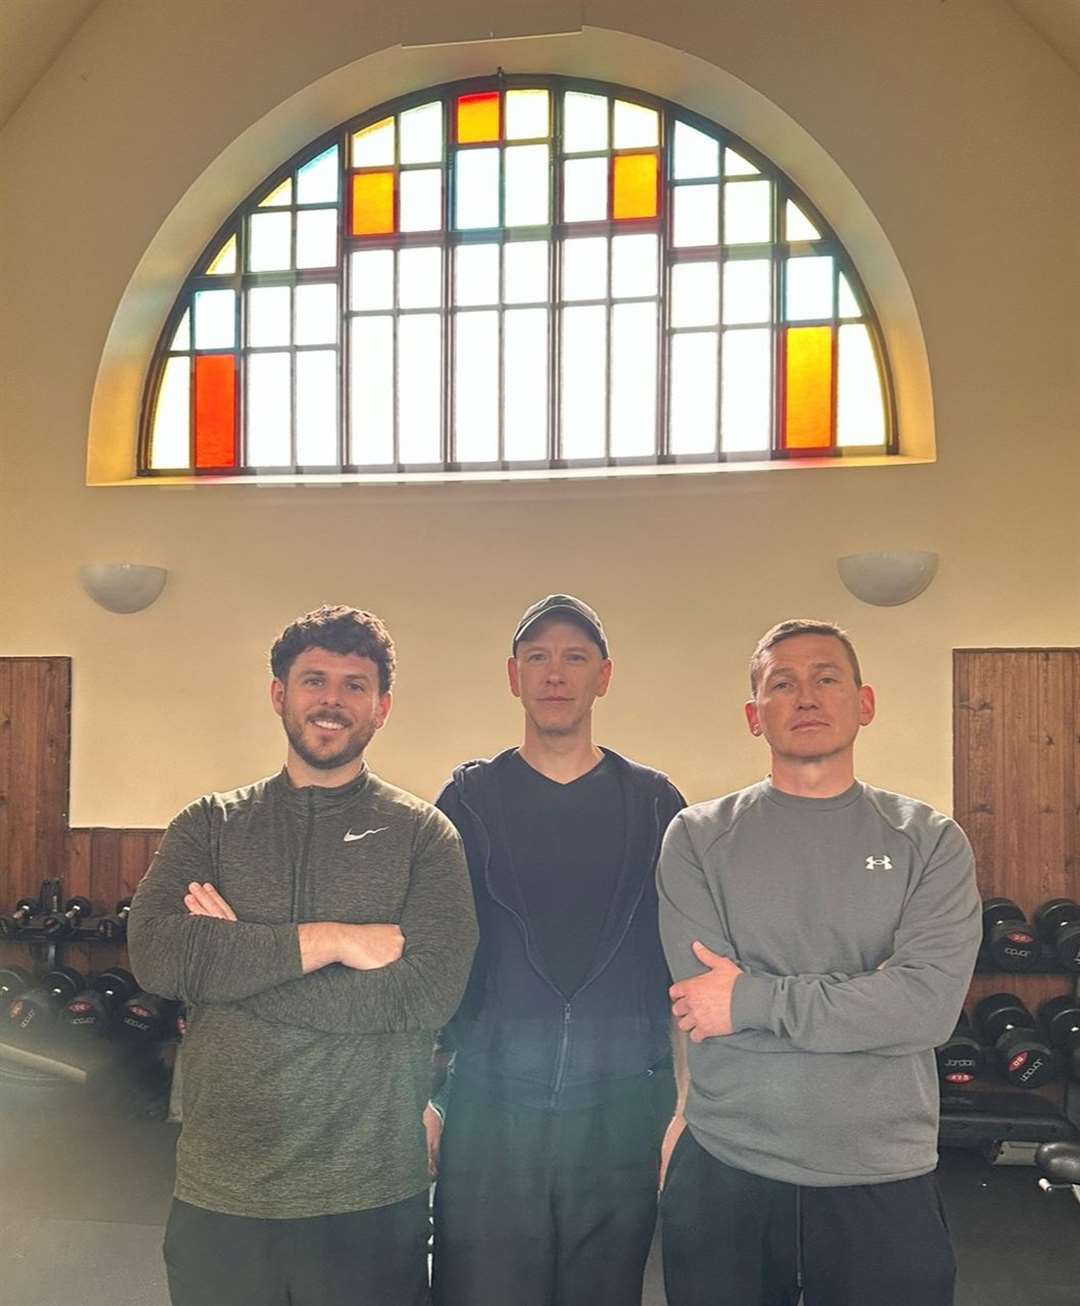 Hoppers Gym has opened inside the Capel United Church under directors Josh King and Paul Keepax, with the help of personal trainer and class instructor Paul Kavanagh